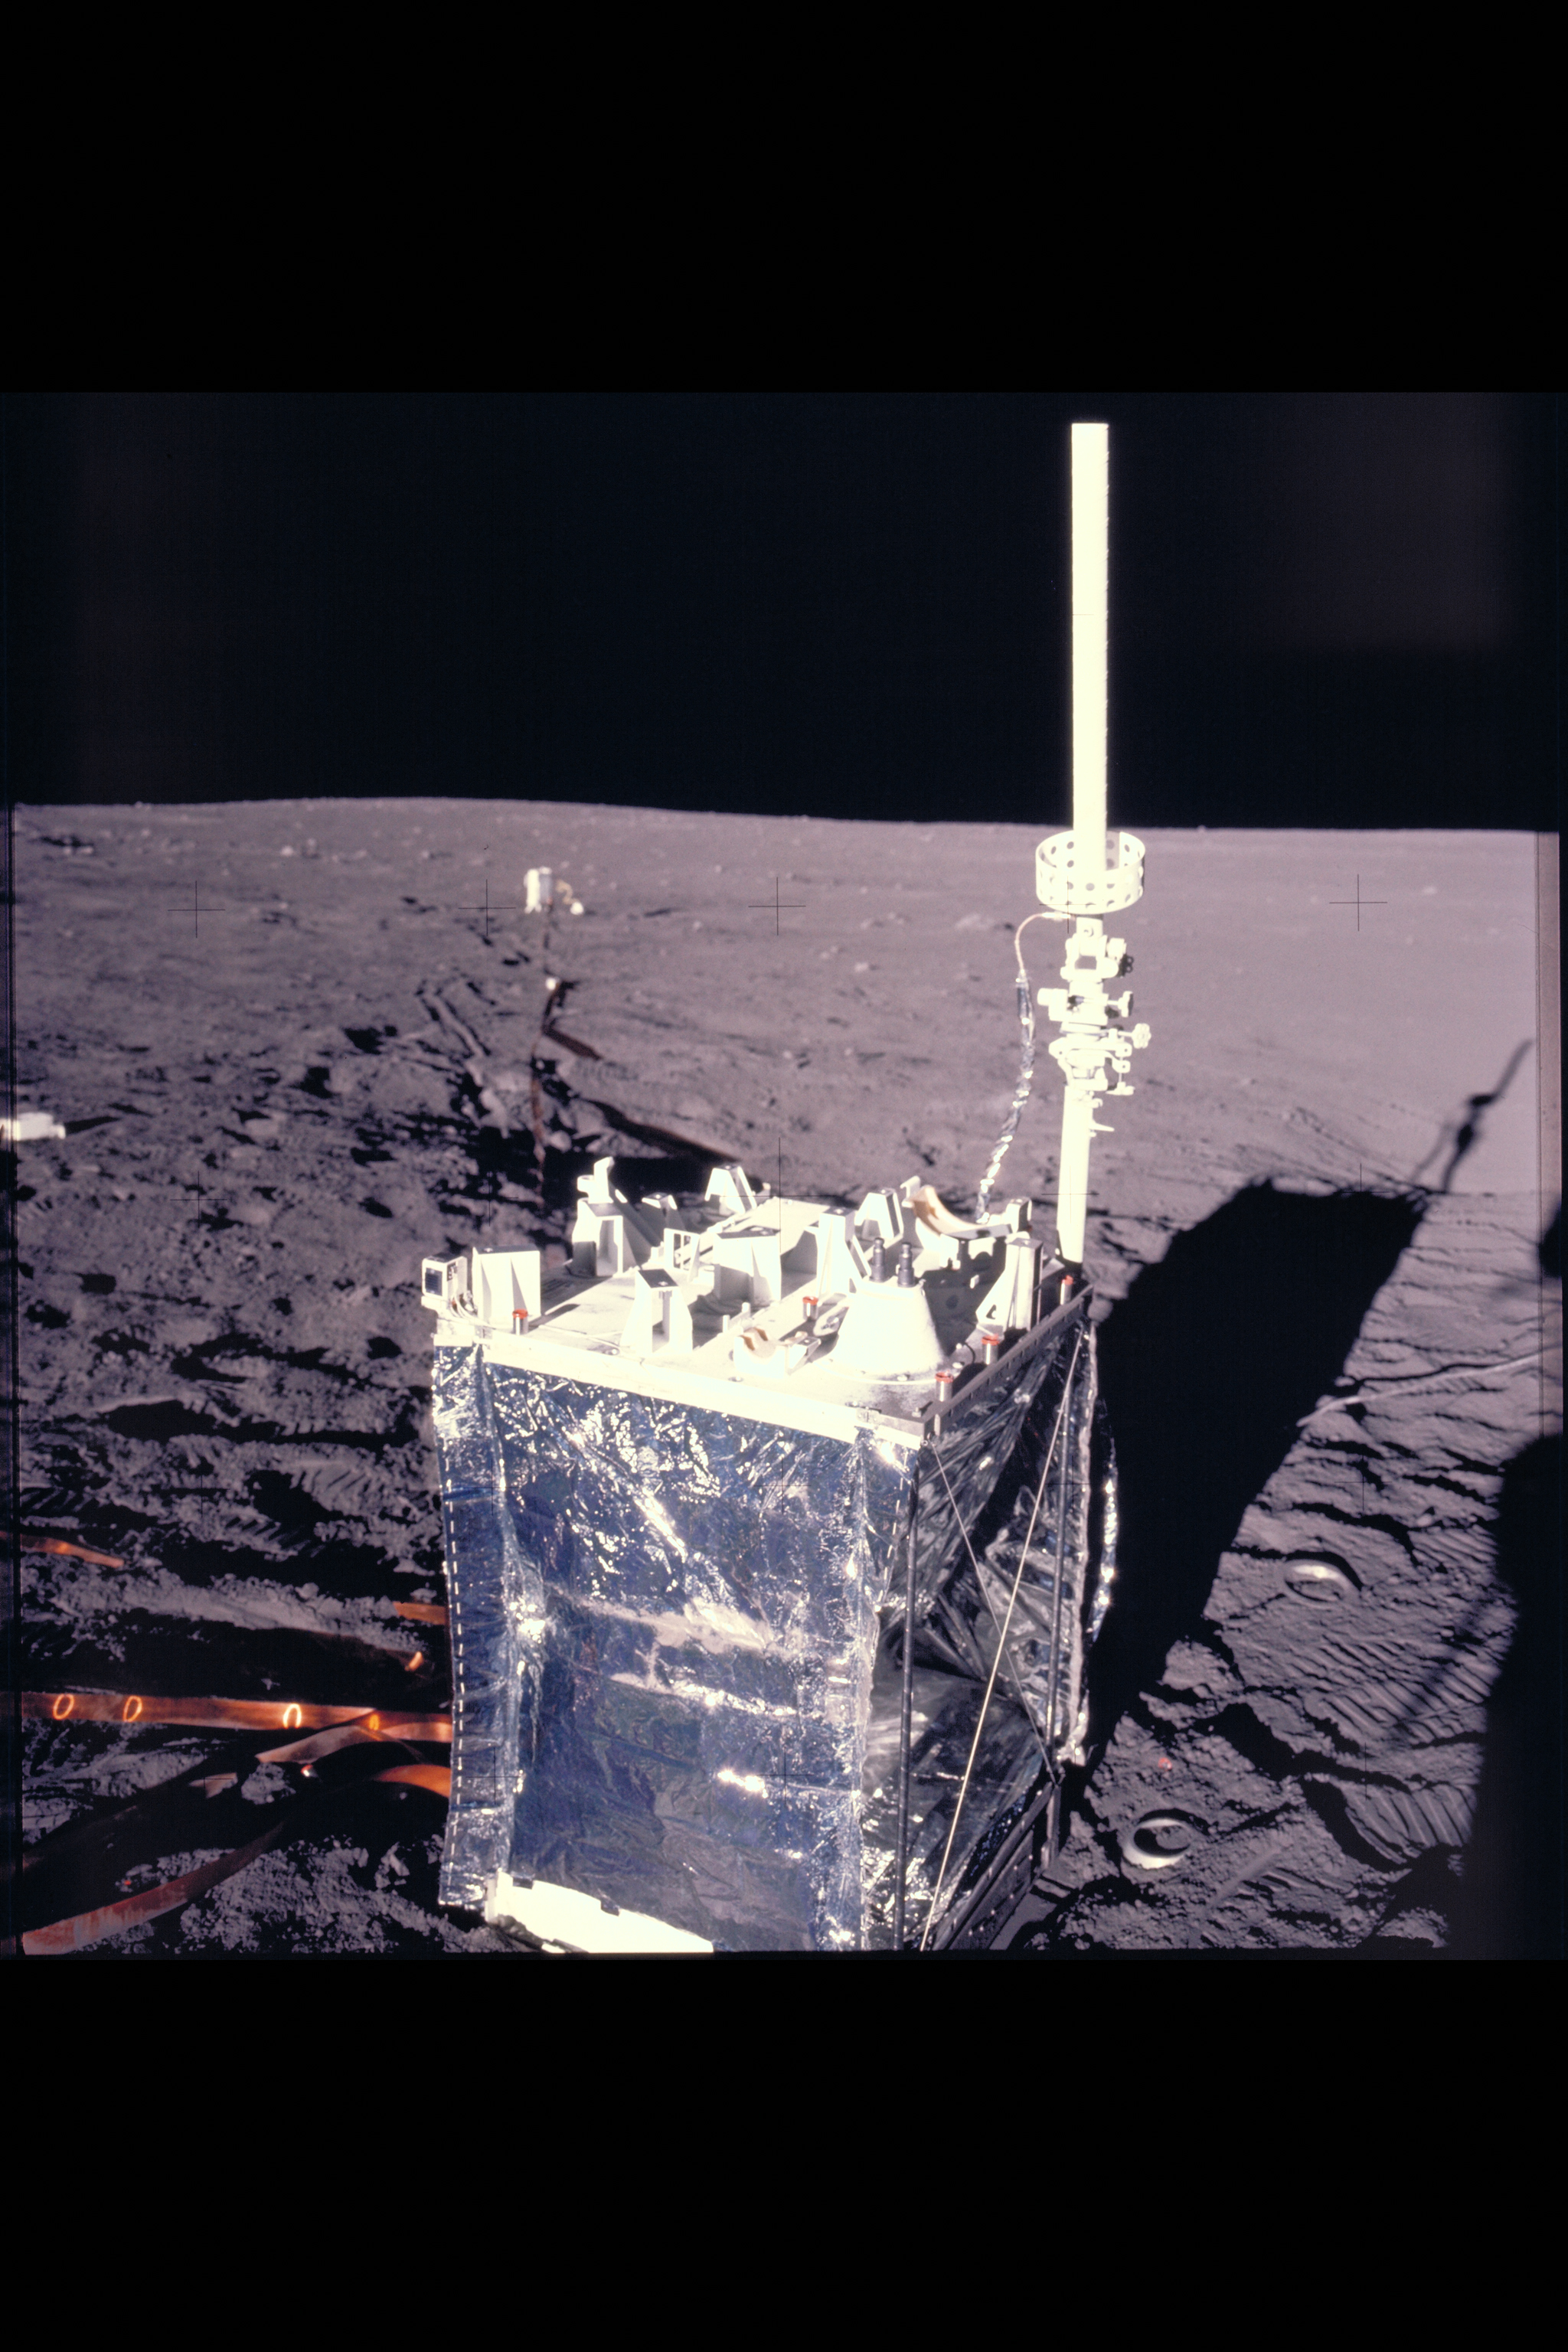 Moon Dust Could Be a Problem for Future Lunar Explorers